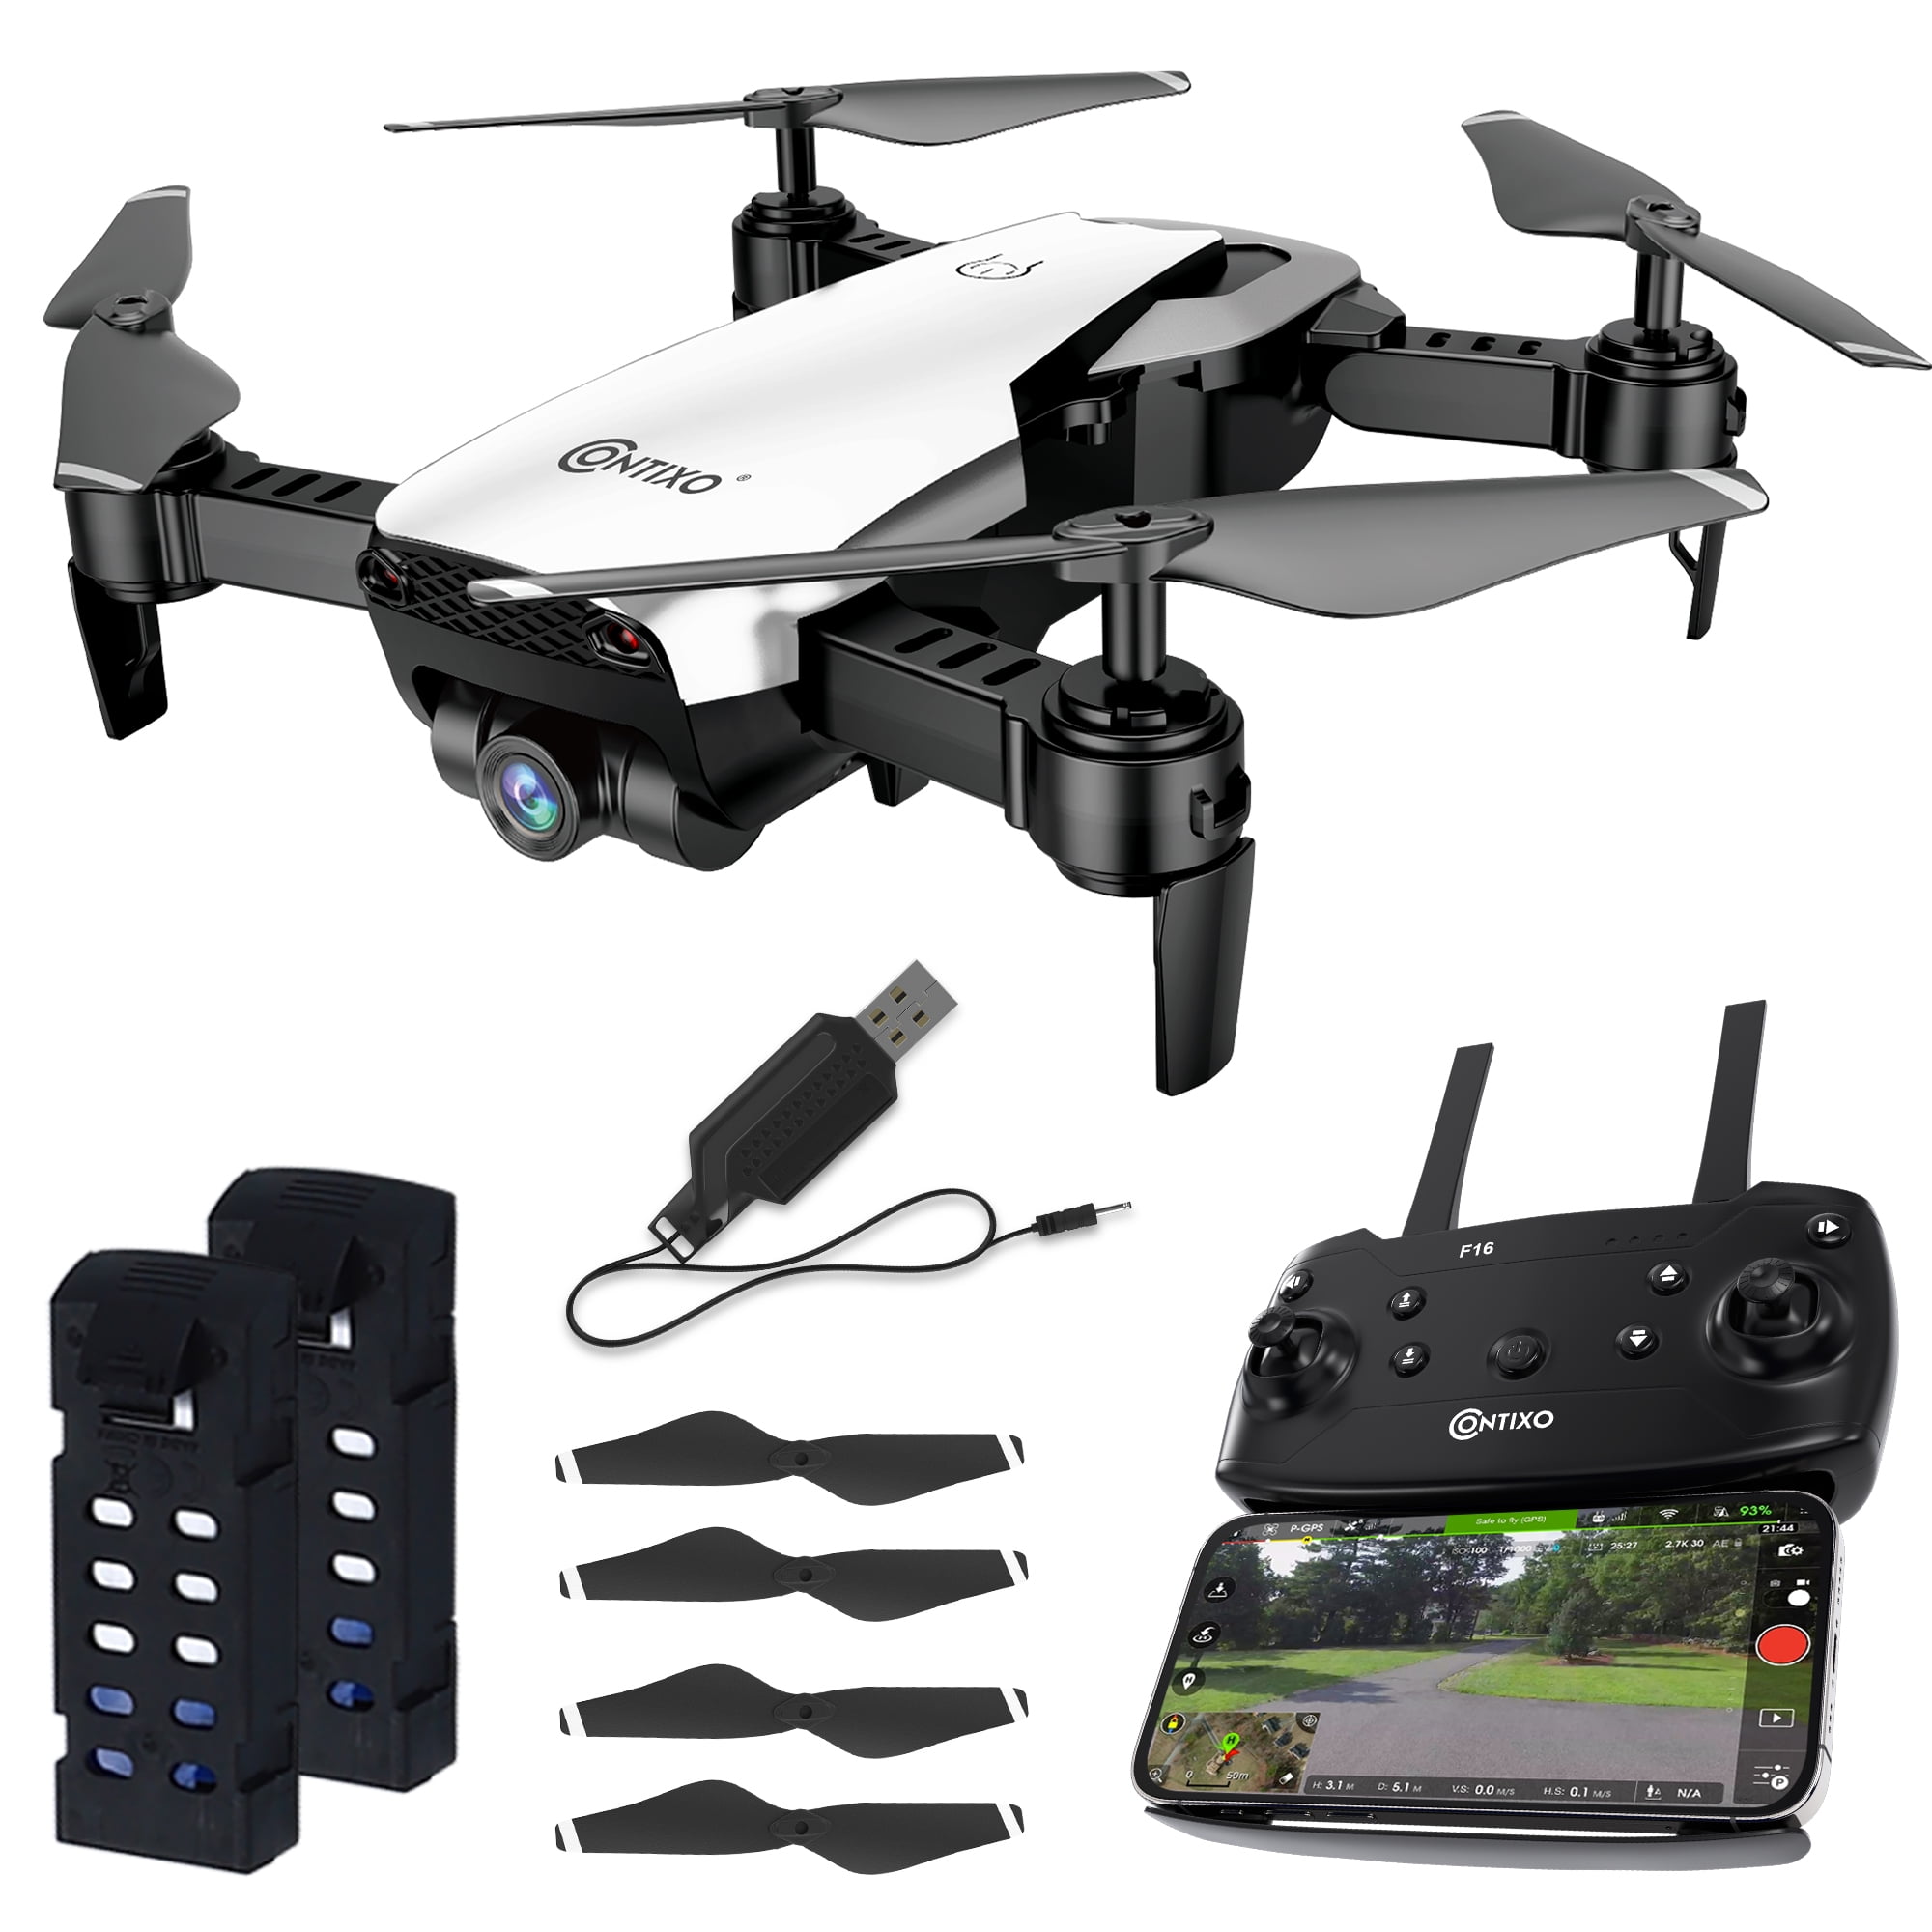 Contixo F16 FPV Drone with 1080P HD Camera WiFi, RC Quadcopter Axis Gyro, Follow  Me Mode, Altitude Hold, Gesture Control, Headless Mode, 2.4GHz drone for  Kids  Adults Batteries Included